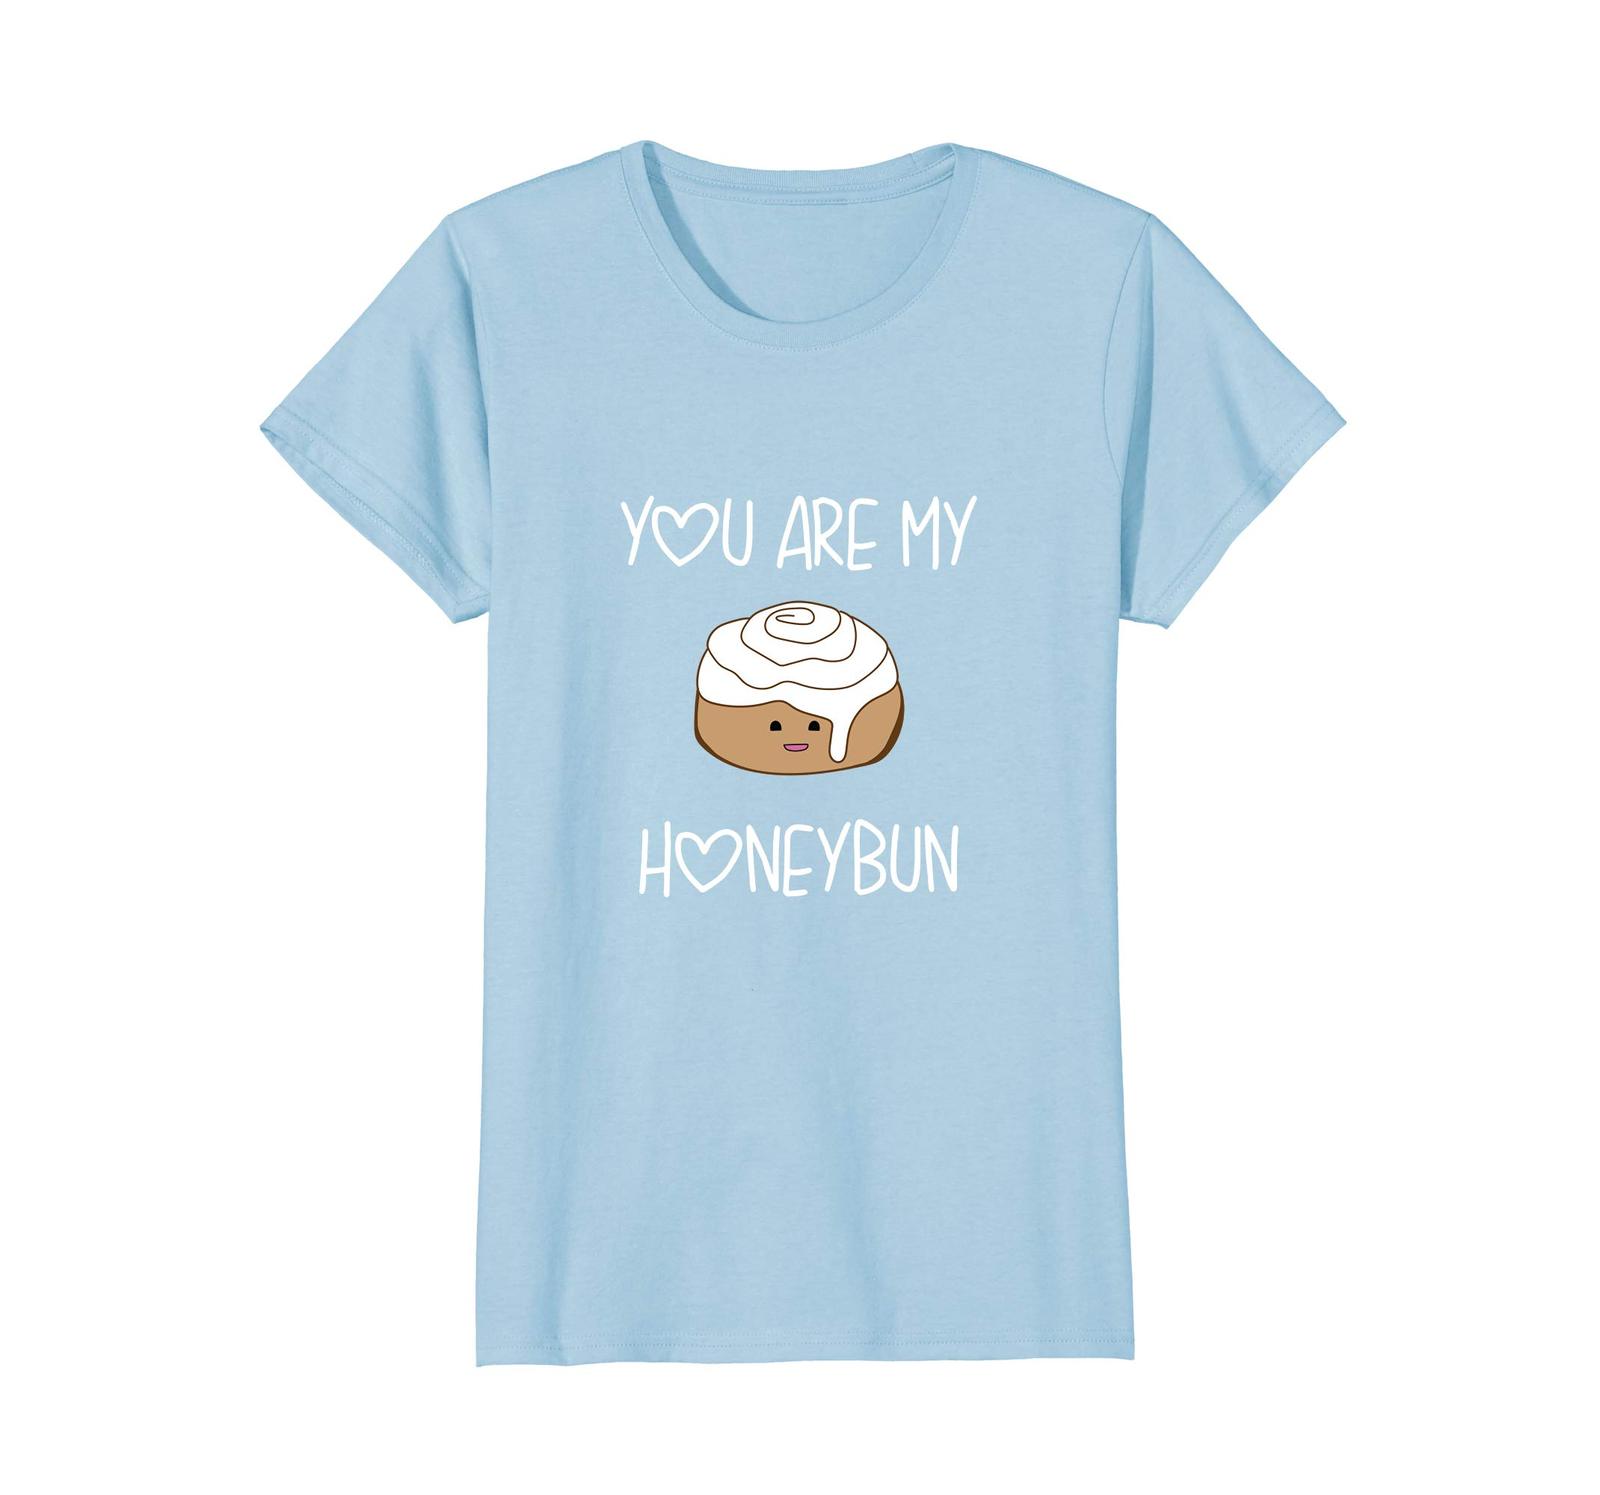 New Style - You are my Honeybun Cute Food Shirts for Girls and Boys ...